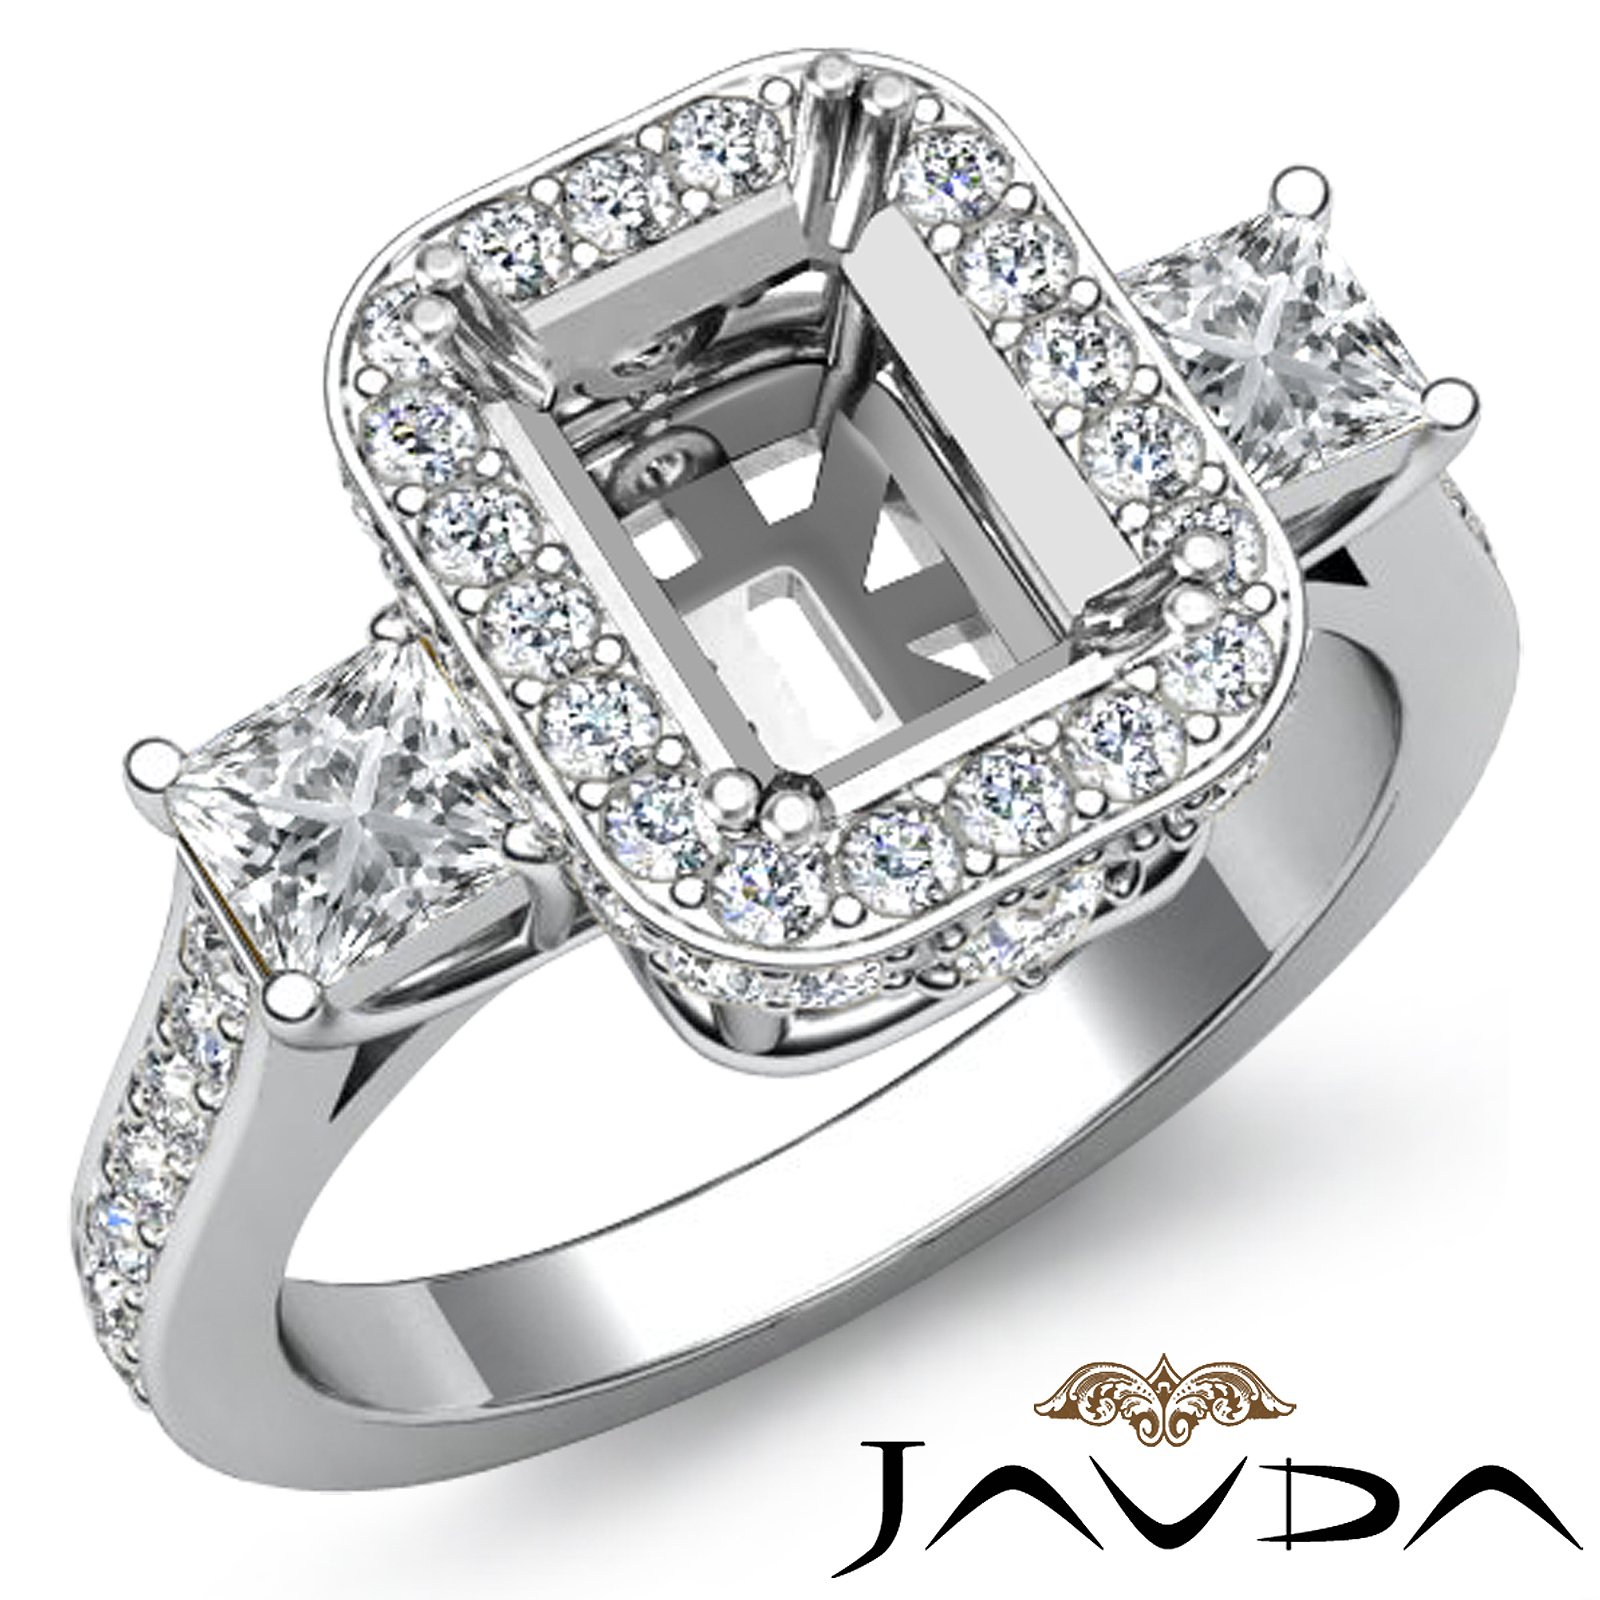 0.91 Carat Cushion Cut Solitaire Diamond Engagement Ring GIA Certified H-I Color VVS1 Clarity Center Stones